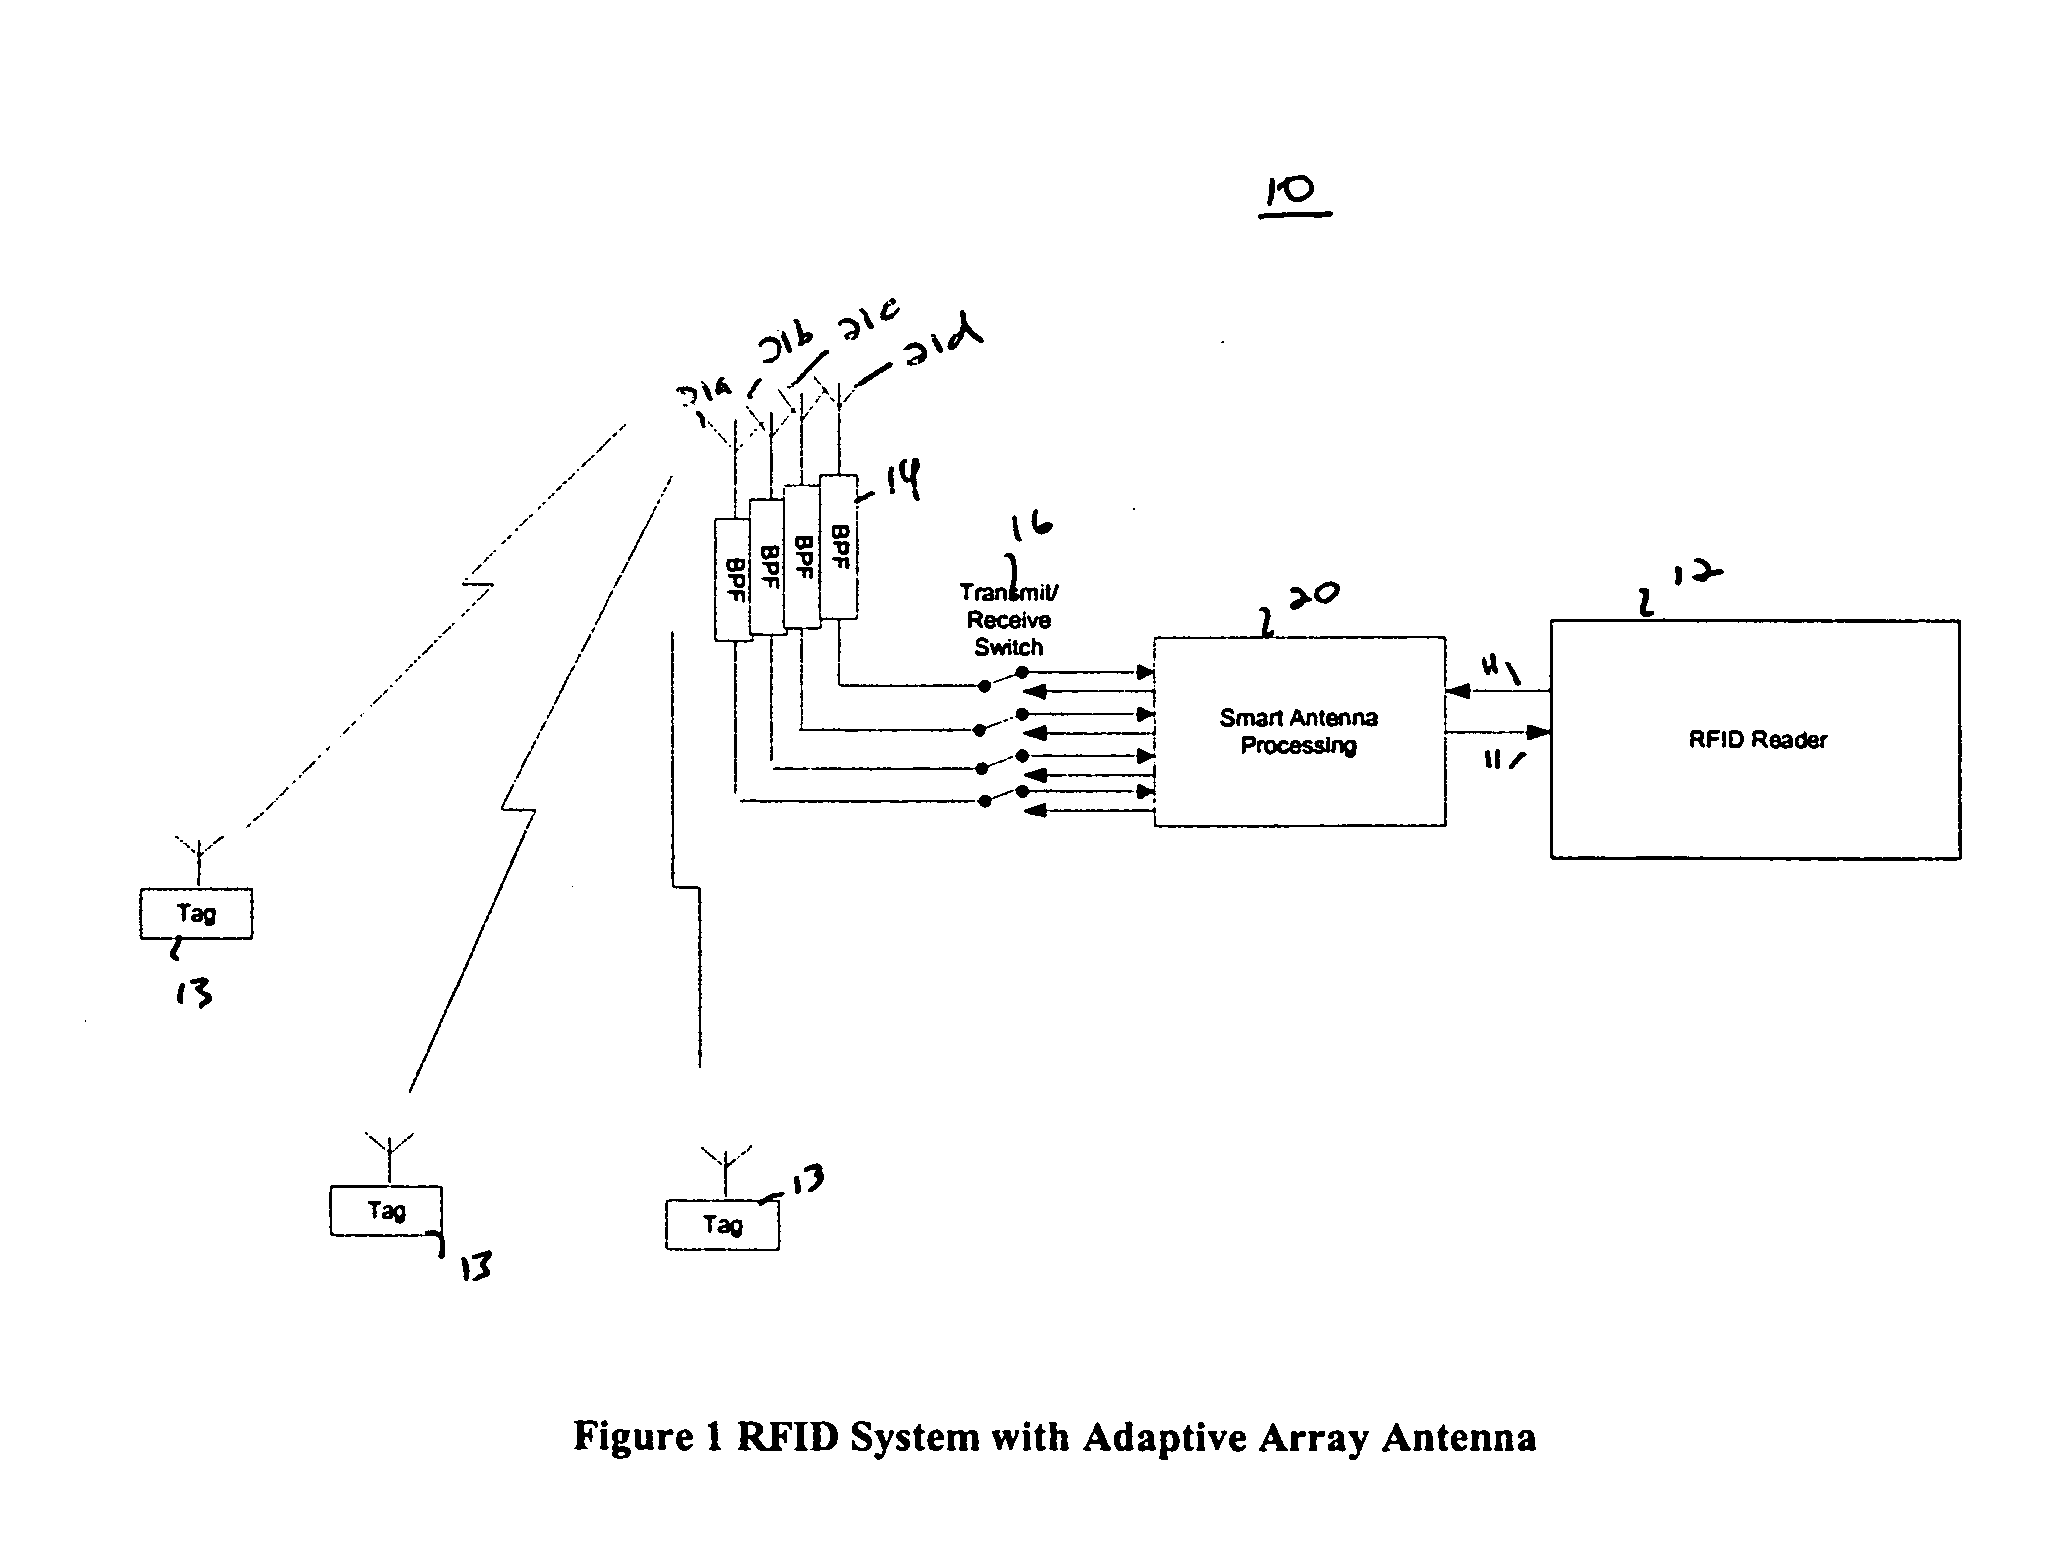 RFID system with an adaptive array antenna